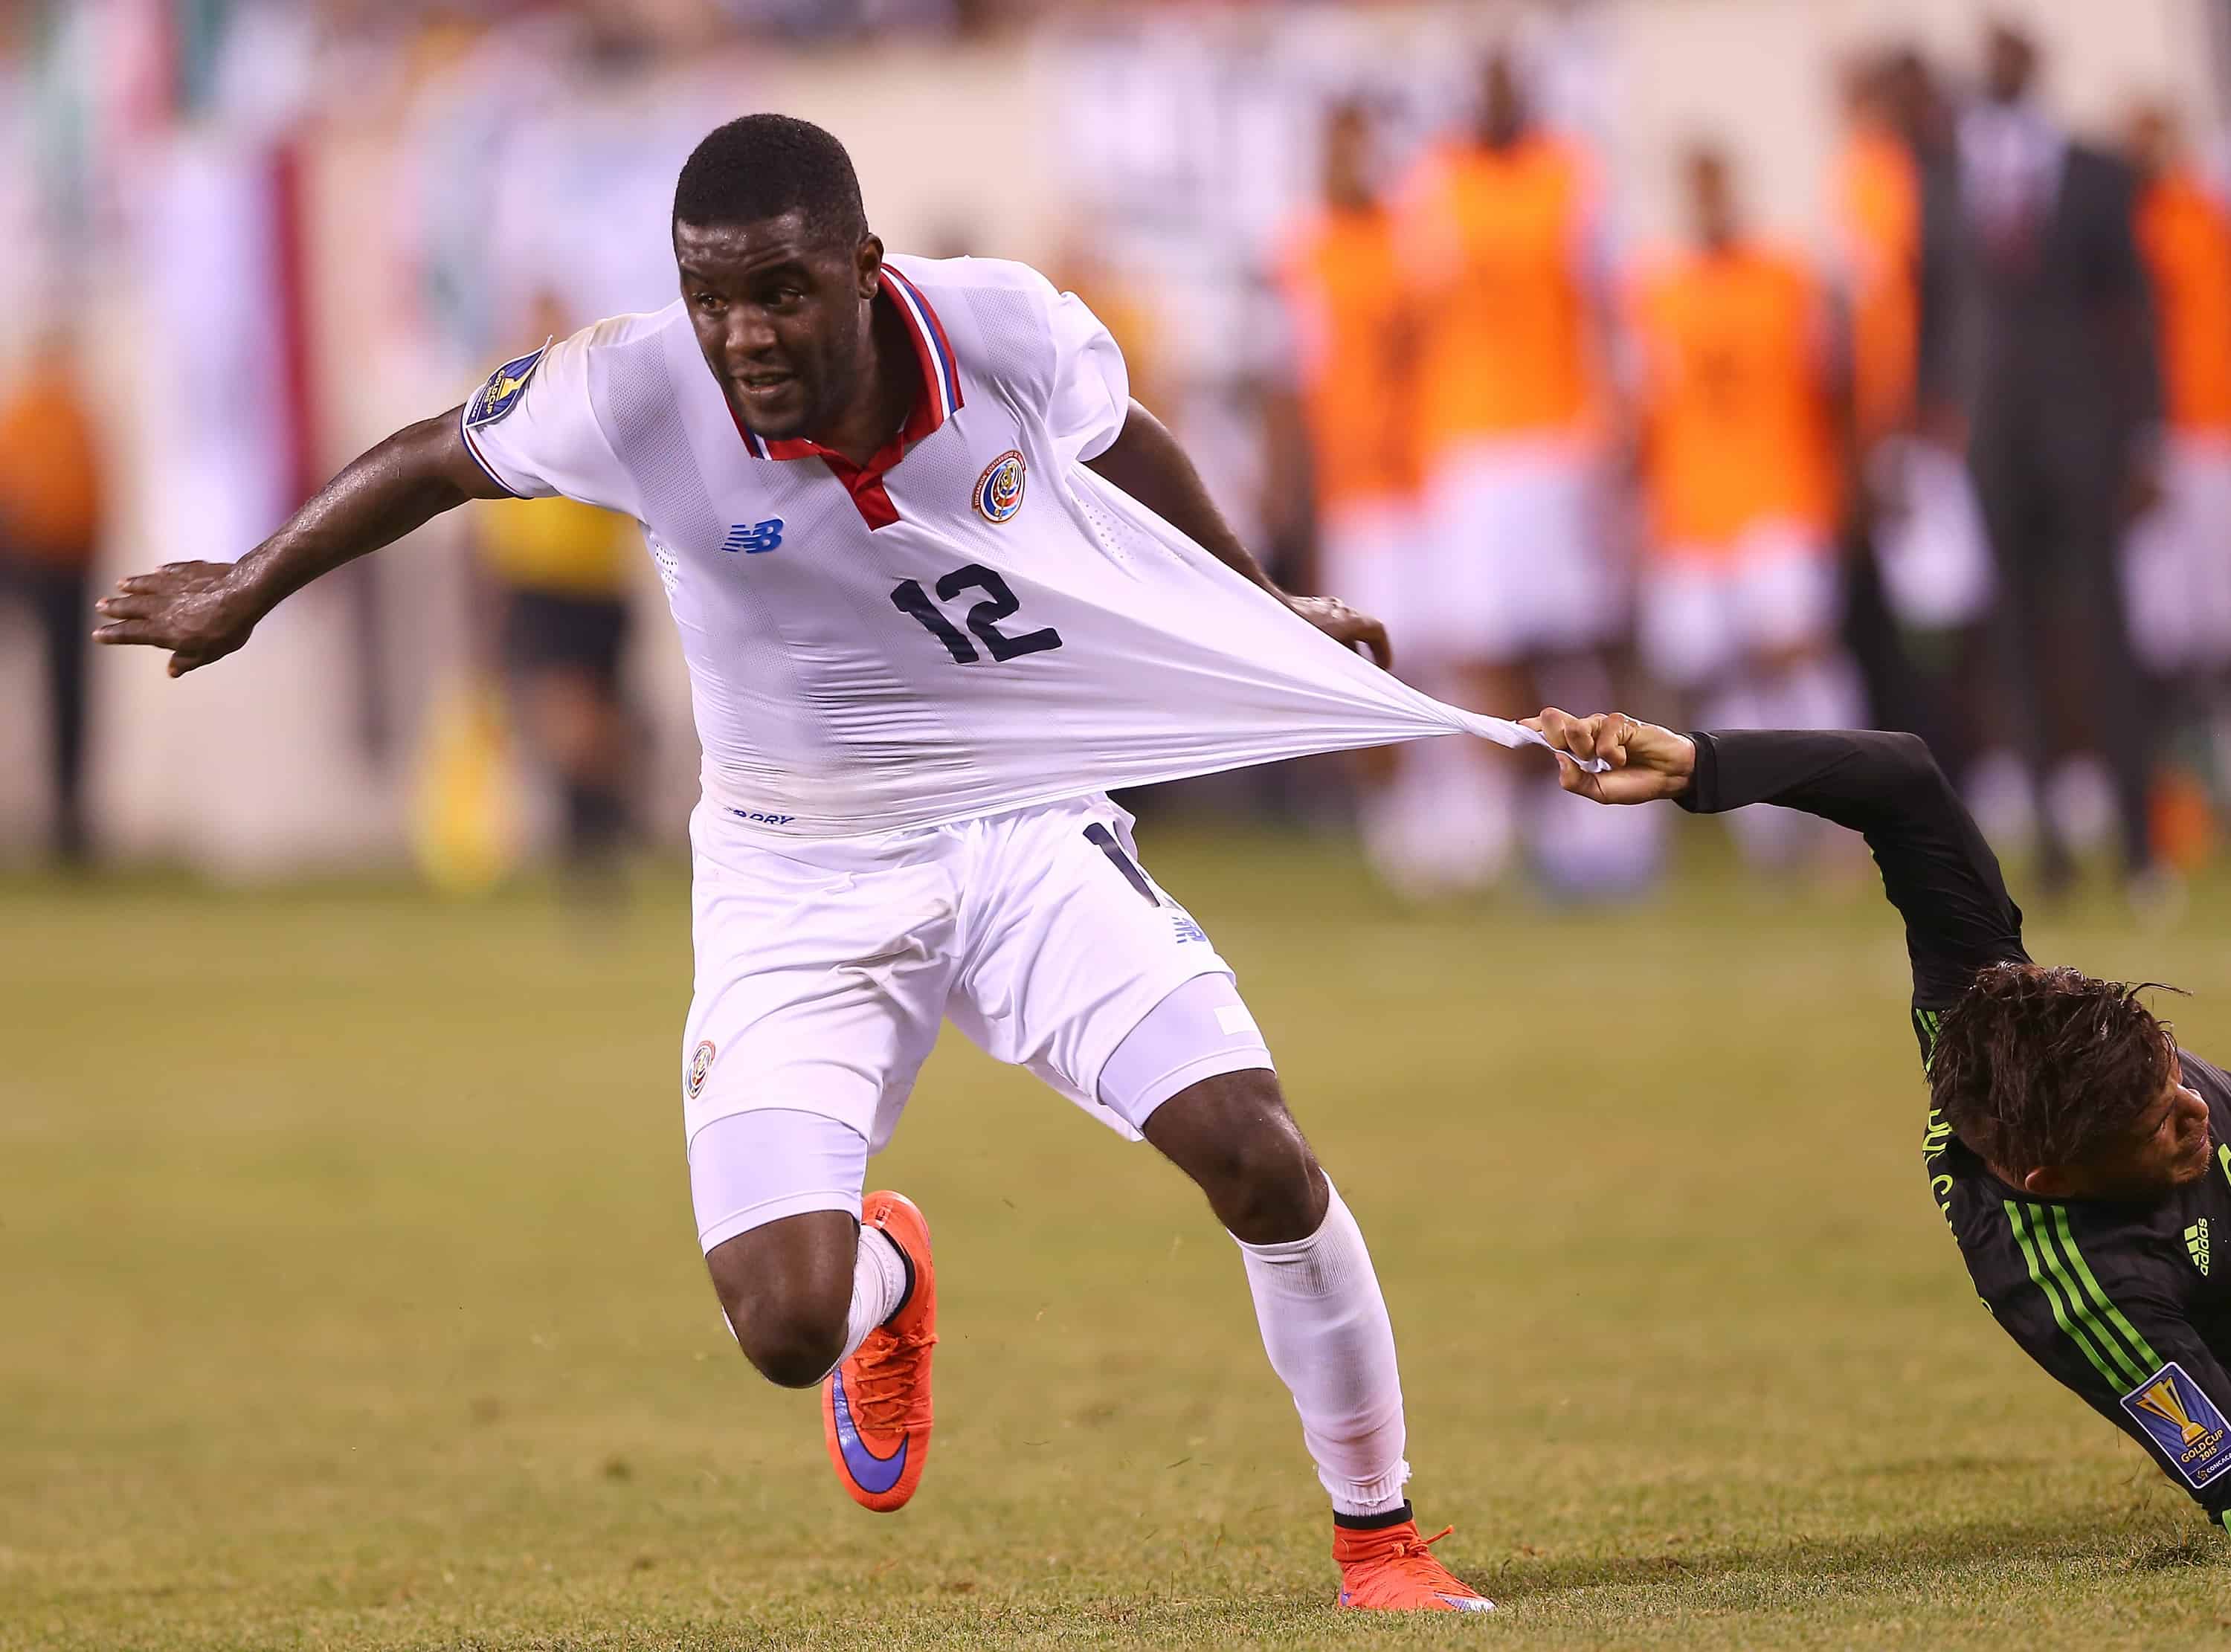 Joel Campbell and Costa Rica head back to New Jersey to play Brazil after their heartbreaking CONCACAF Gold Cup loss to Mexico on July 19 in East Rutherford.